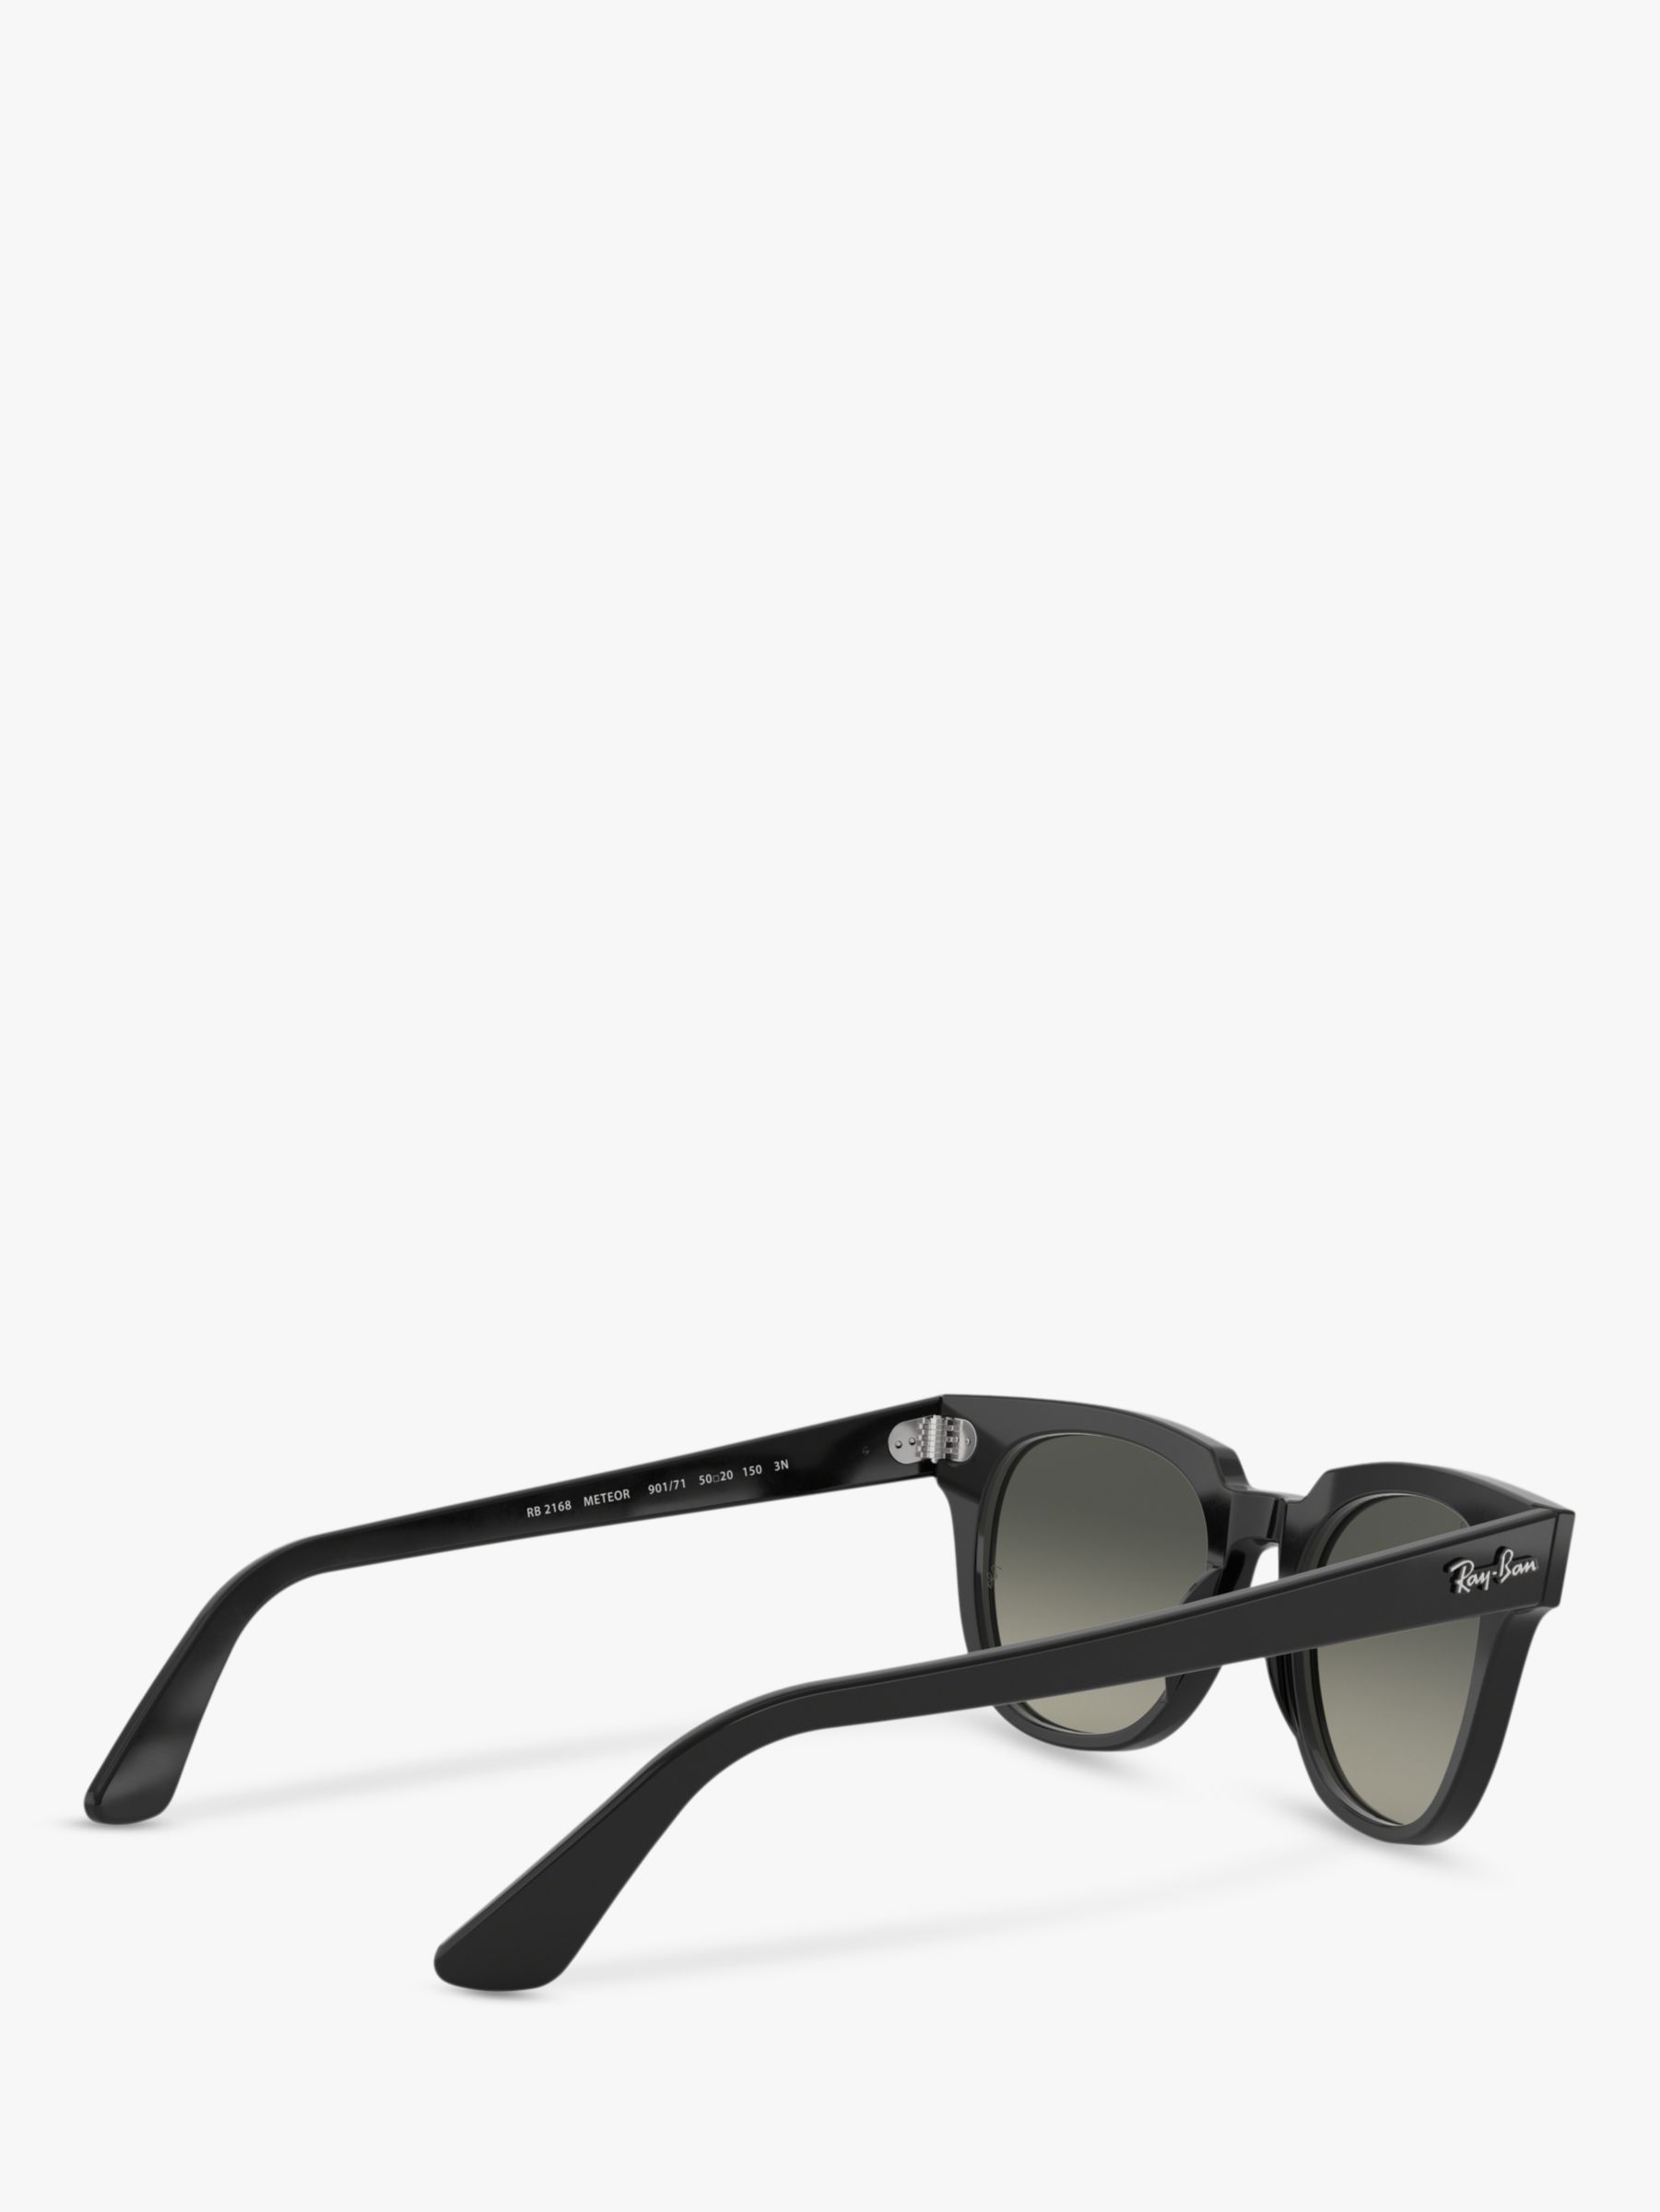 Ray Ban Rb2168 Unisex Square Sunglasses Blackgrey Gradient At John Lewis And Partners 7749